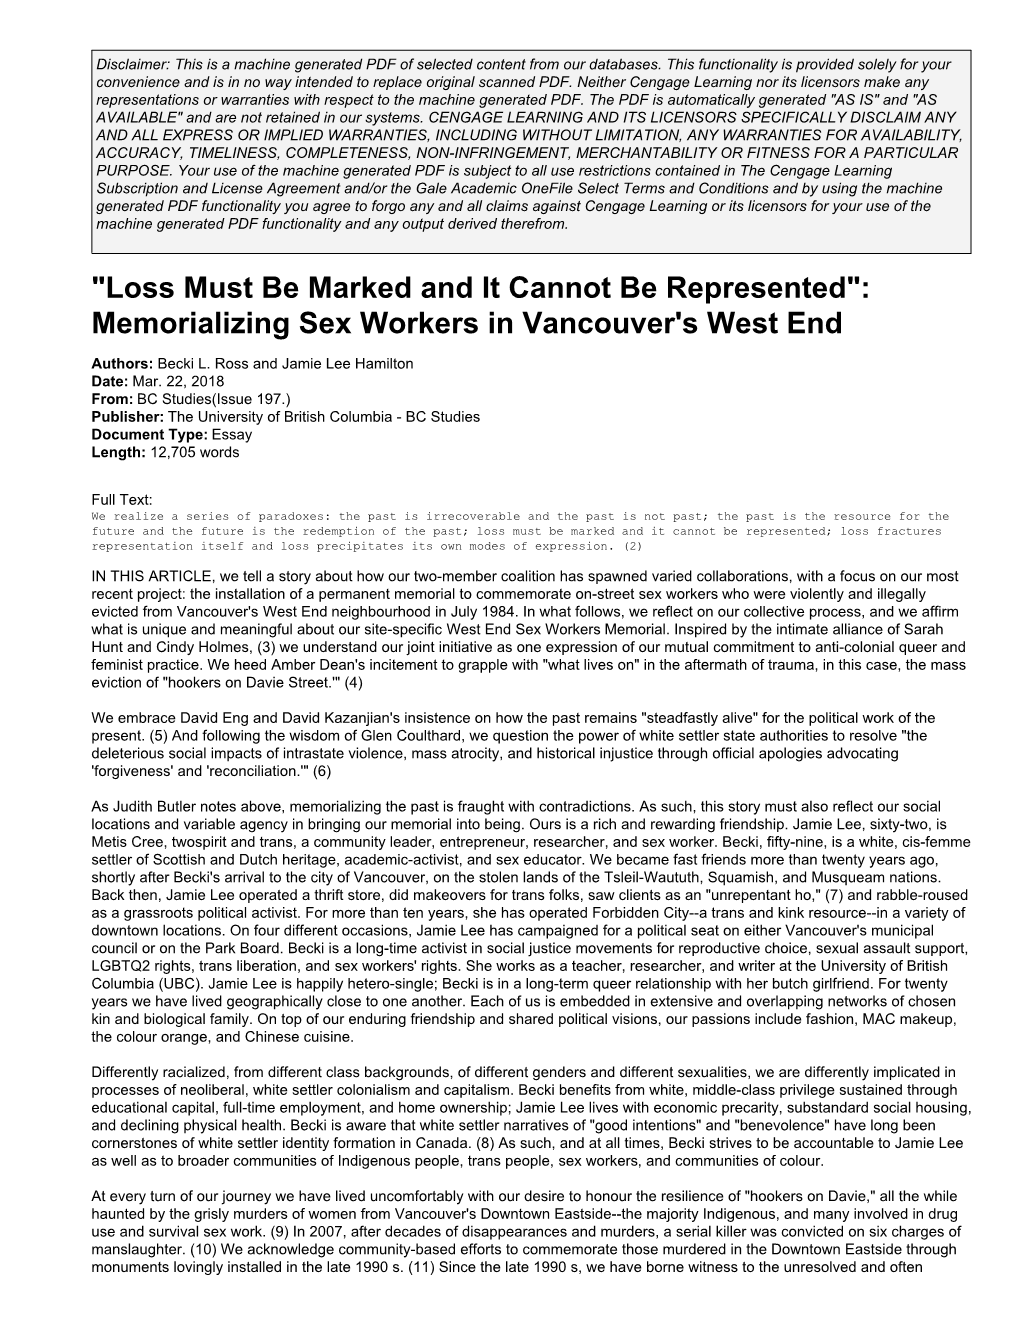 Memorializing Sex Workers in Vancouver's West End